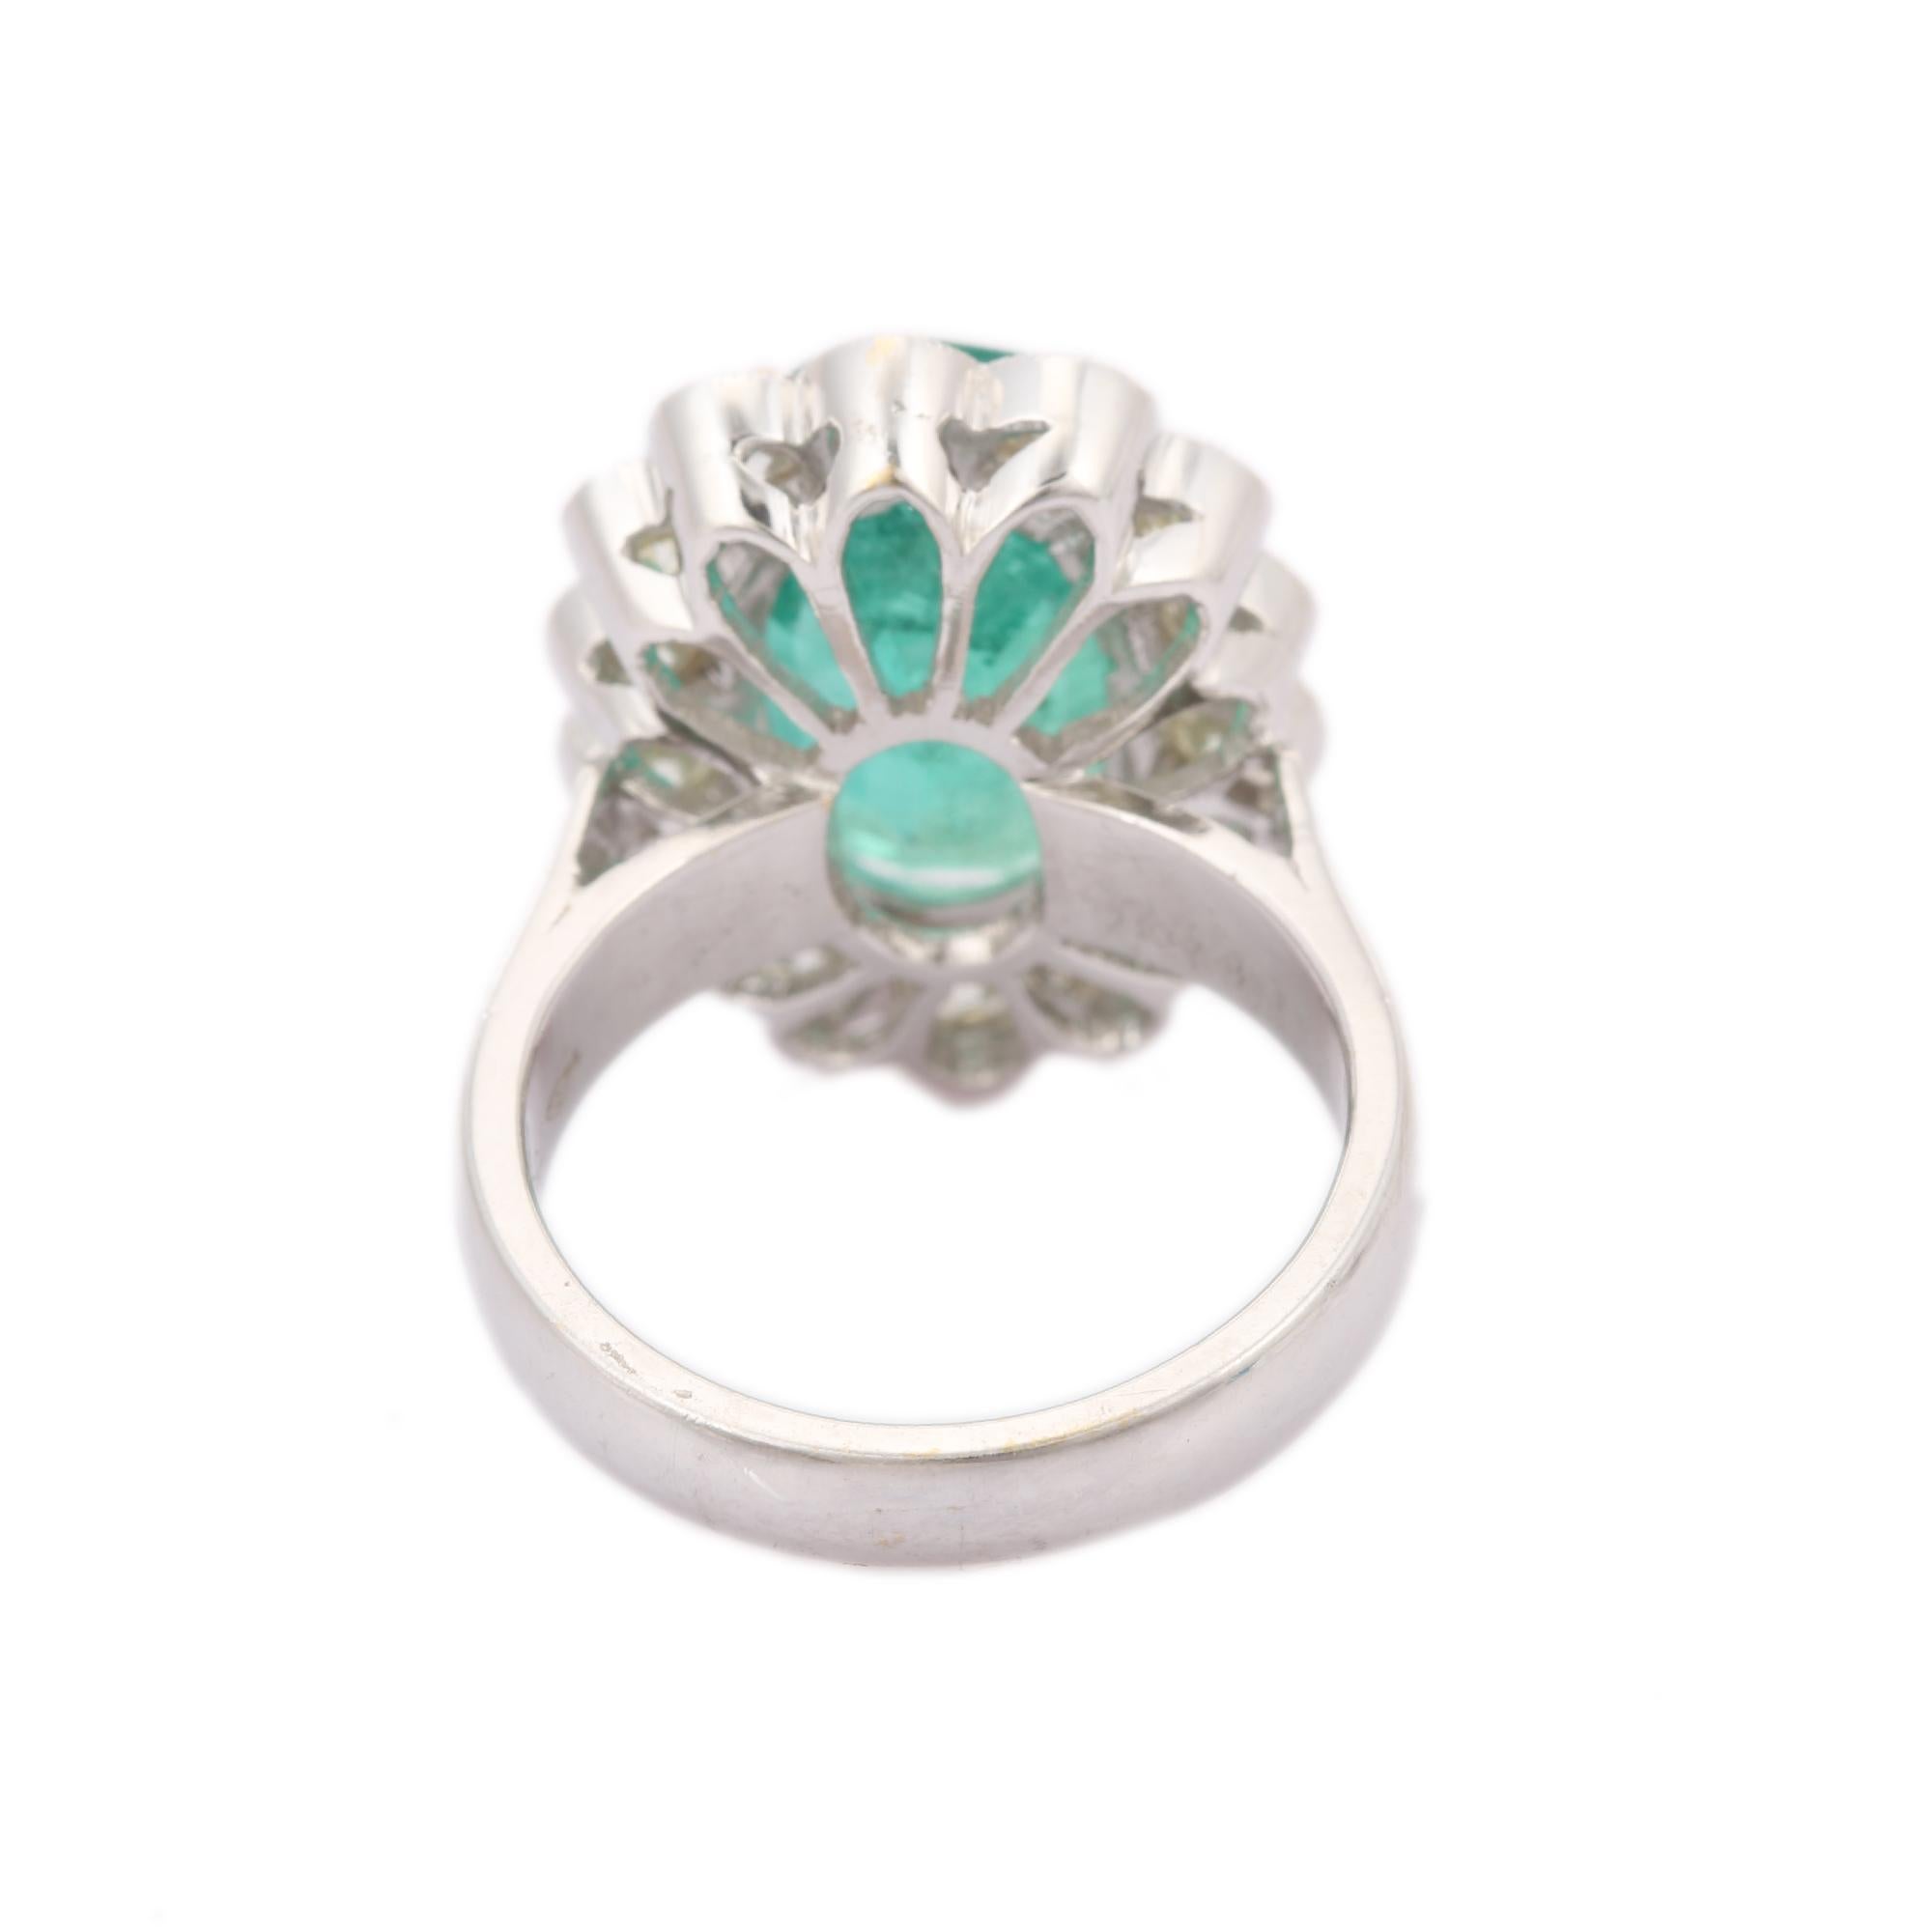 For Sale:  18kt Solid White Gold 8.21 Carat Emerald Gemstone Ring With Diamonds 4